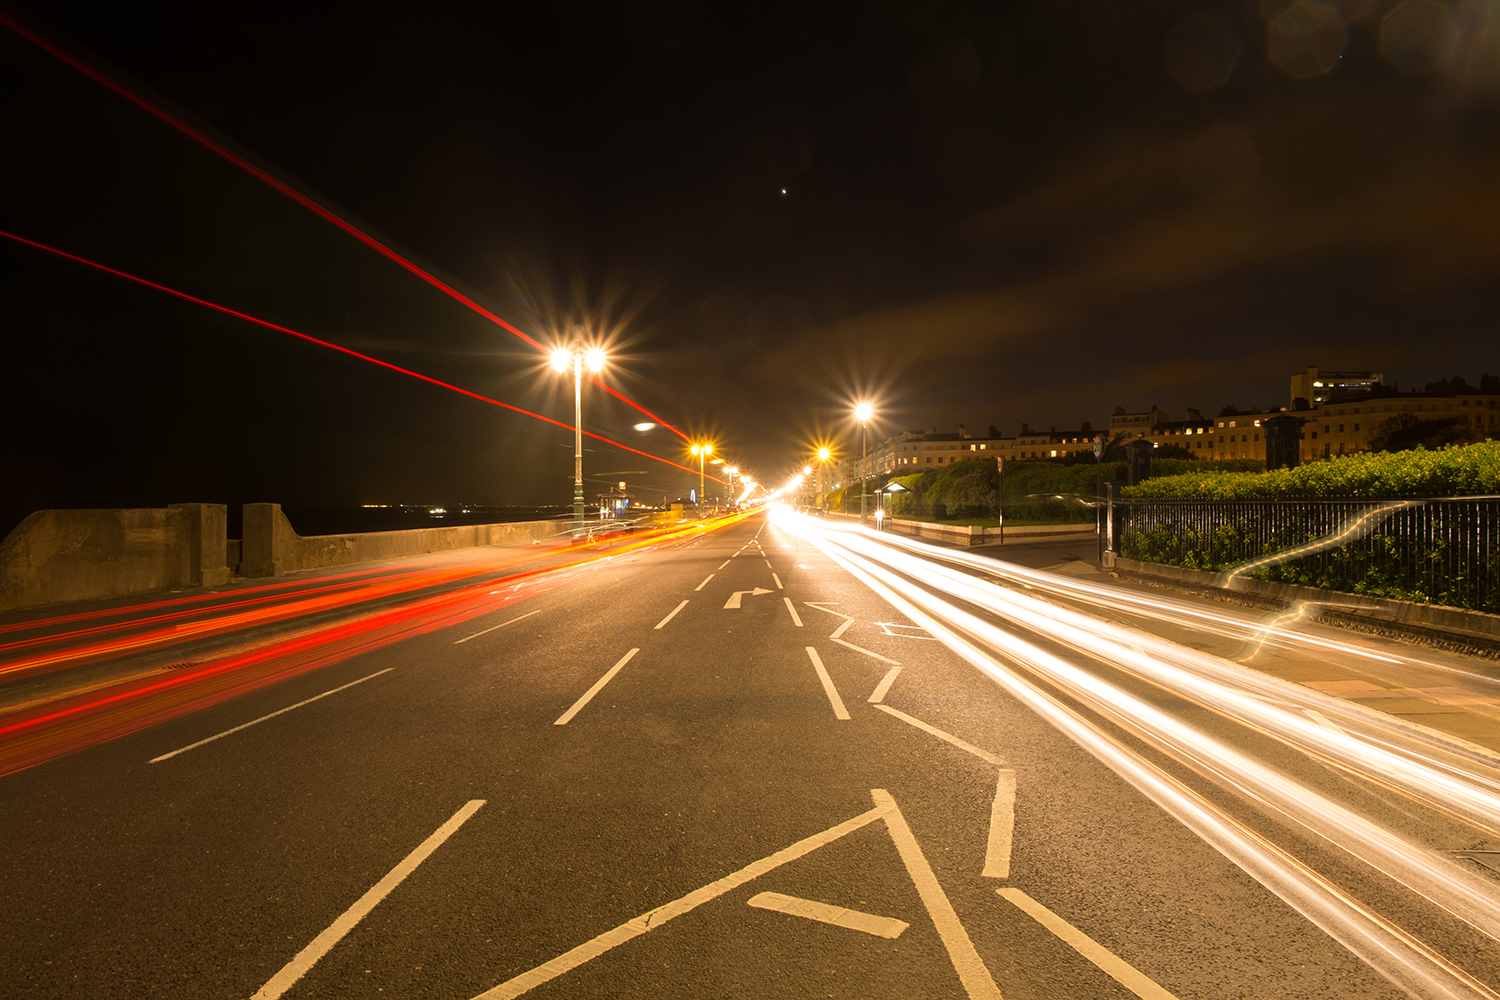 Streaks of light on a road caused by traffic  during a long exposure.